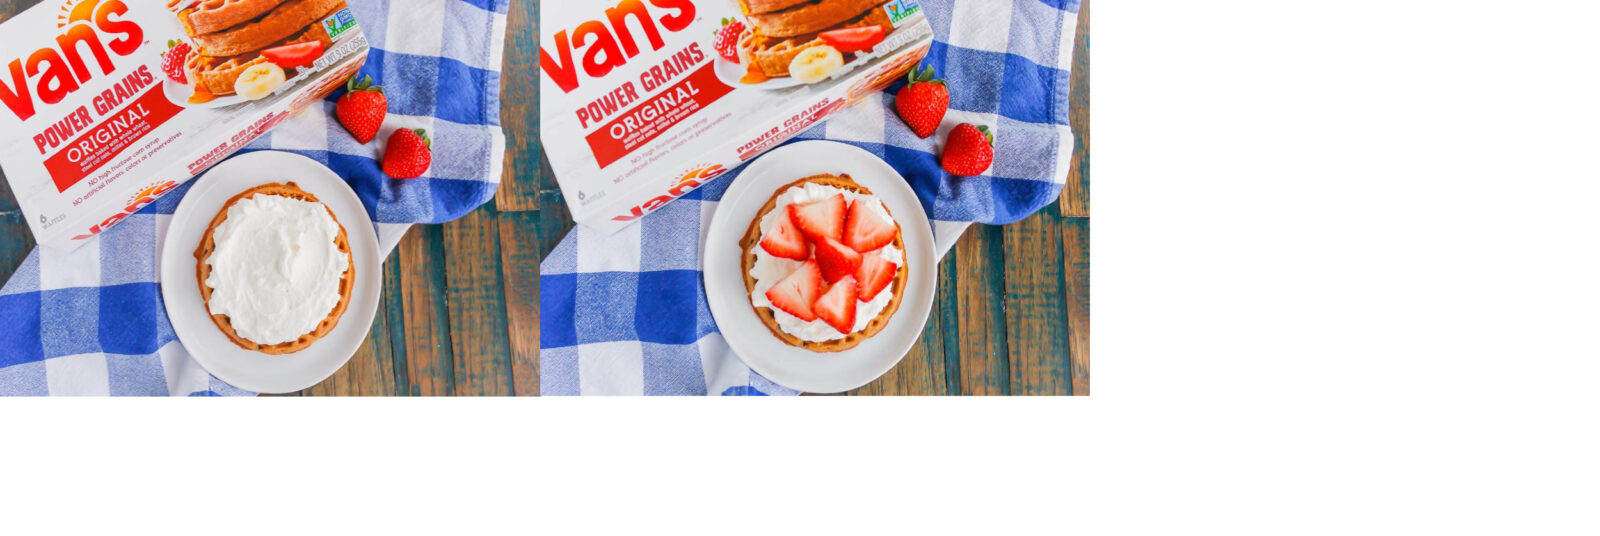 Strawberry Shortcake Waffles make a deliciously sweet and easy breakfast. Made with fresh strawberries, and whipped cream sweetened with honey, this dish is the perfect way to start your day!